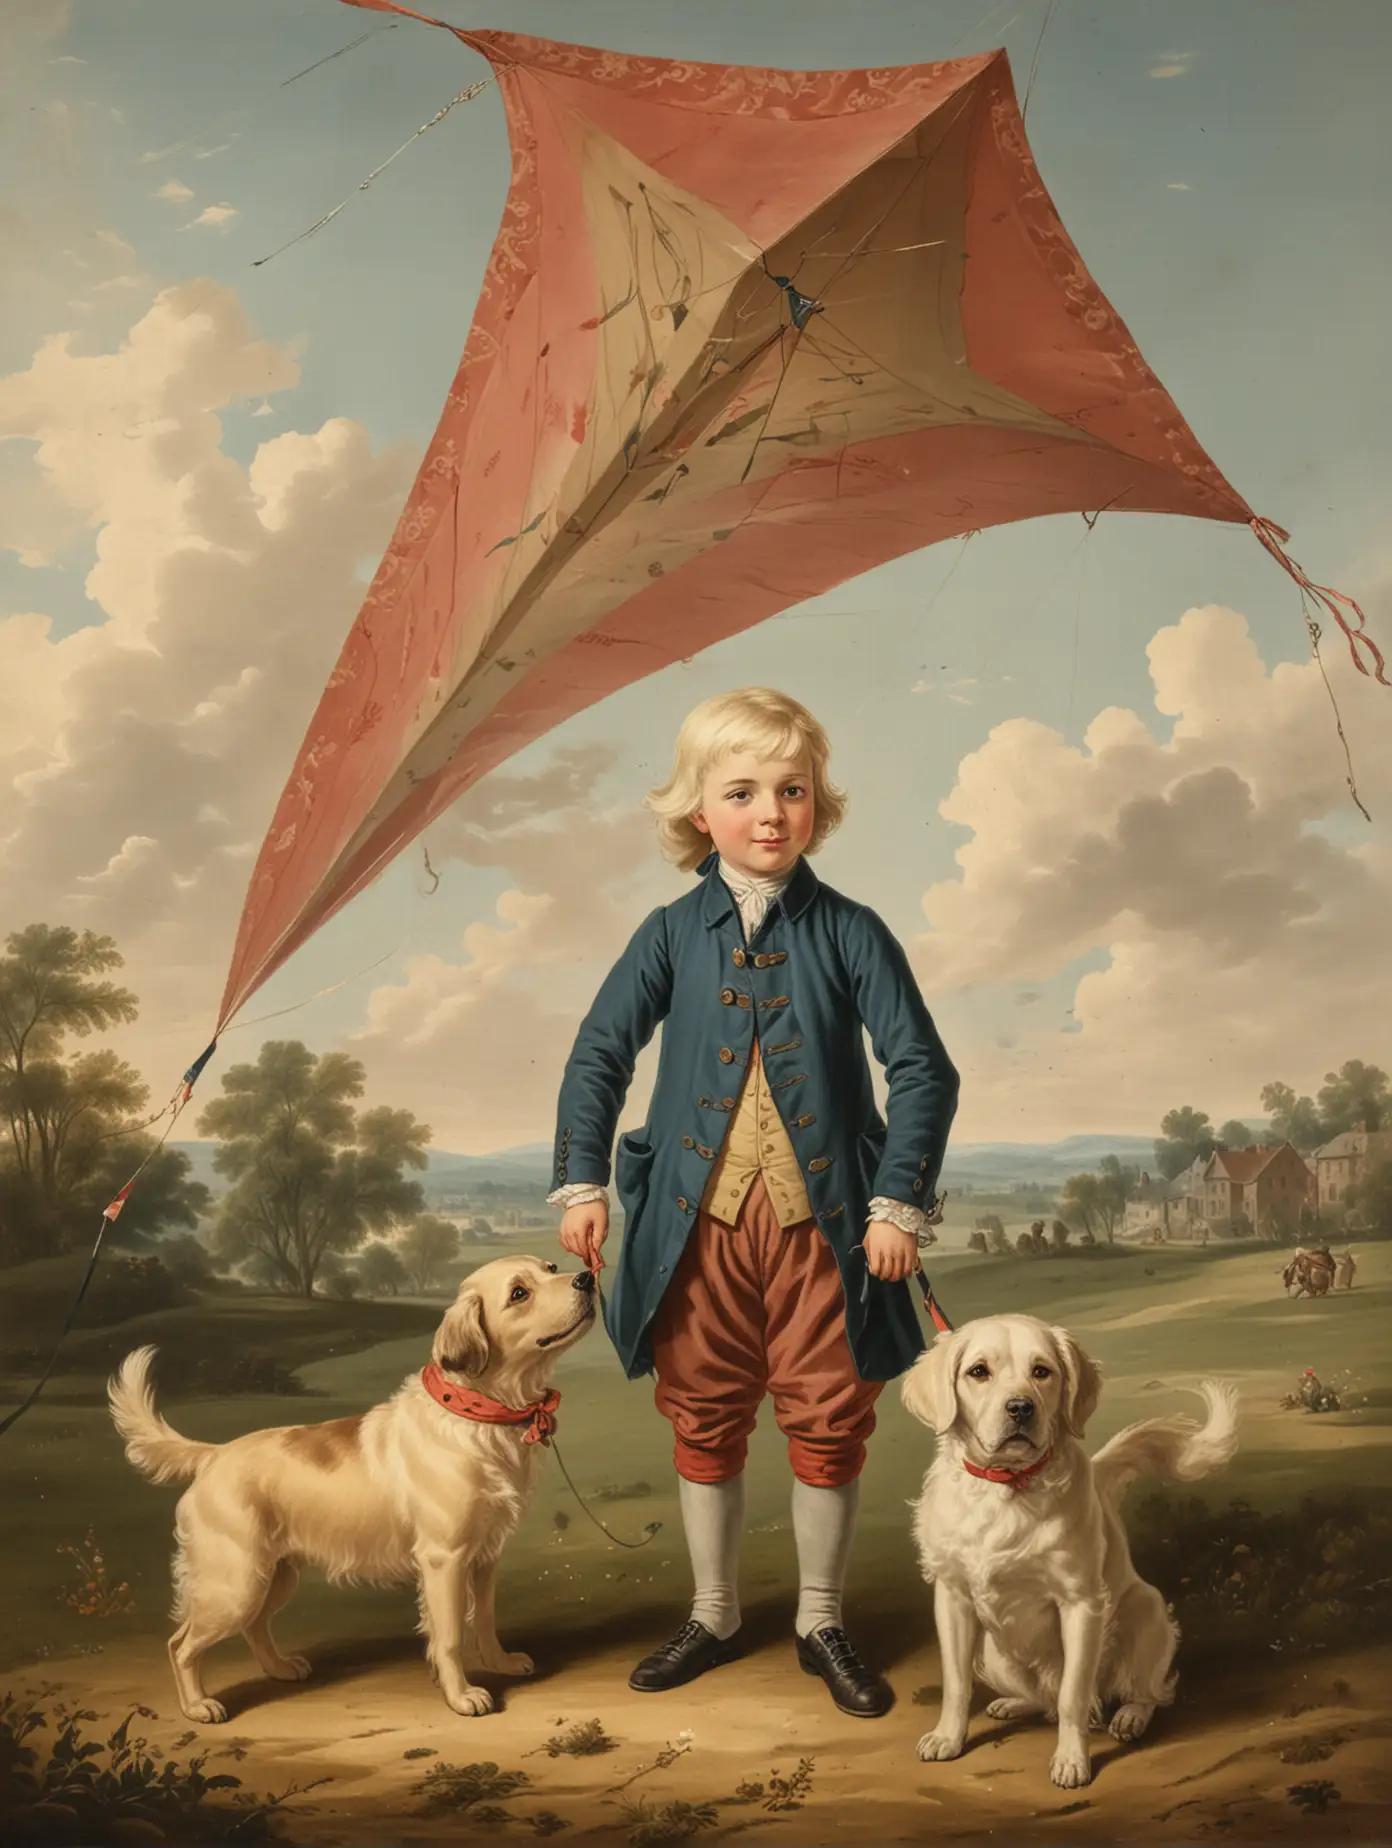 six year old blond boy standing by large kite and dog circa 1750